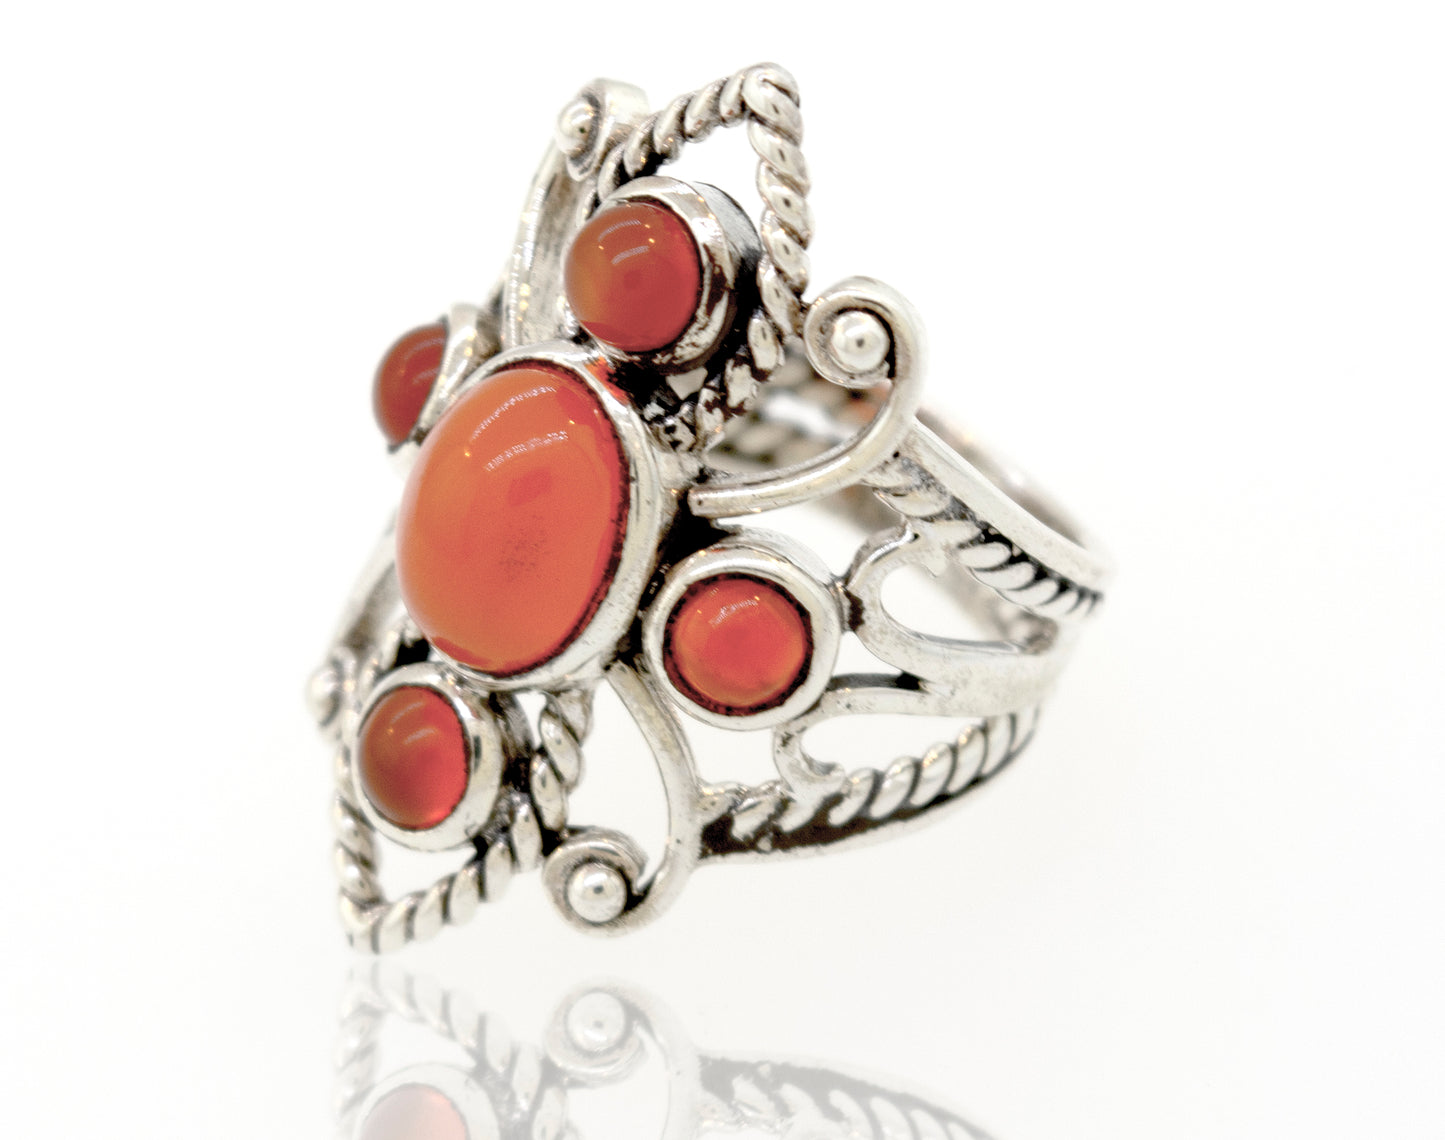 
                  
                    A Super Silver sterling silver ring adorned with a vibrant red coral stone, available at our trusted online store.
                  
                